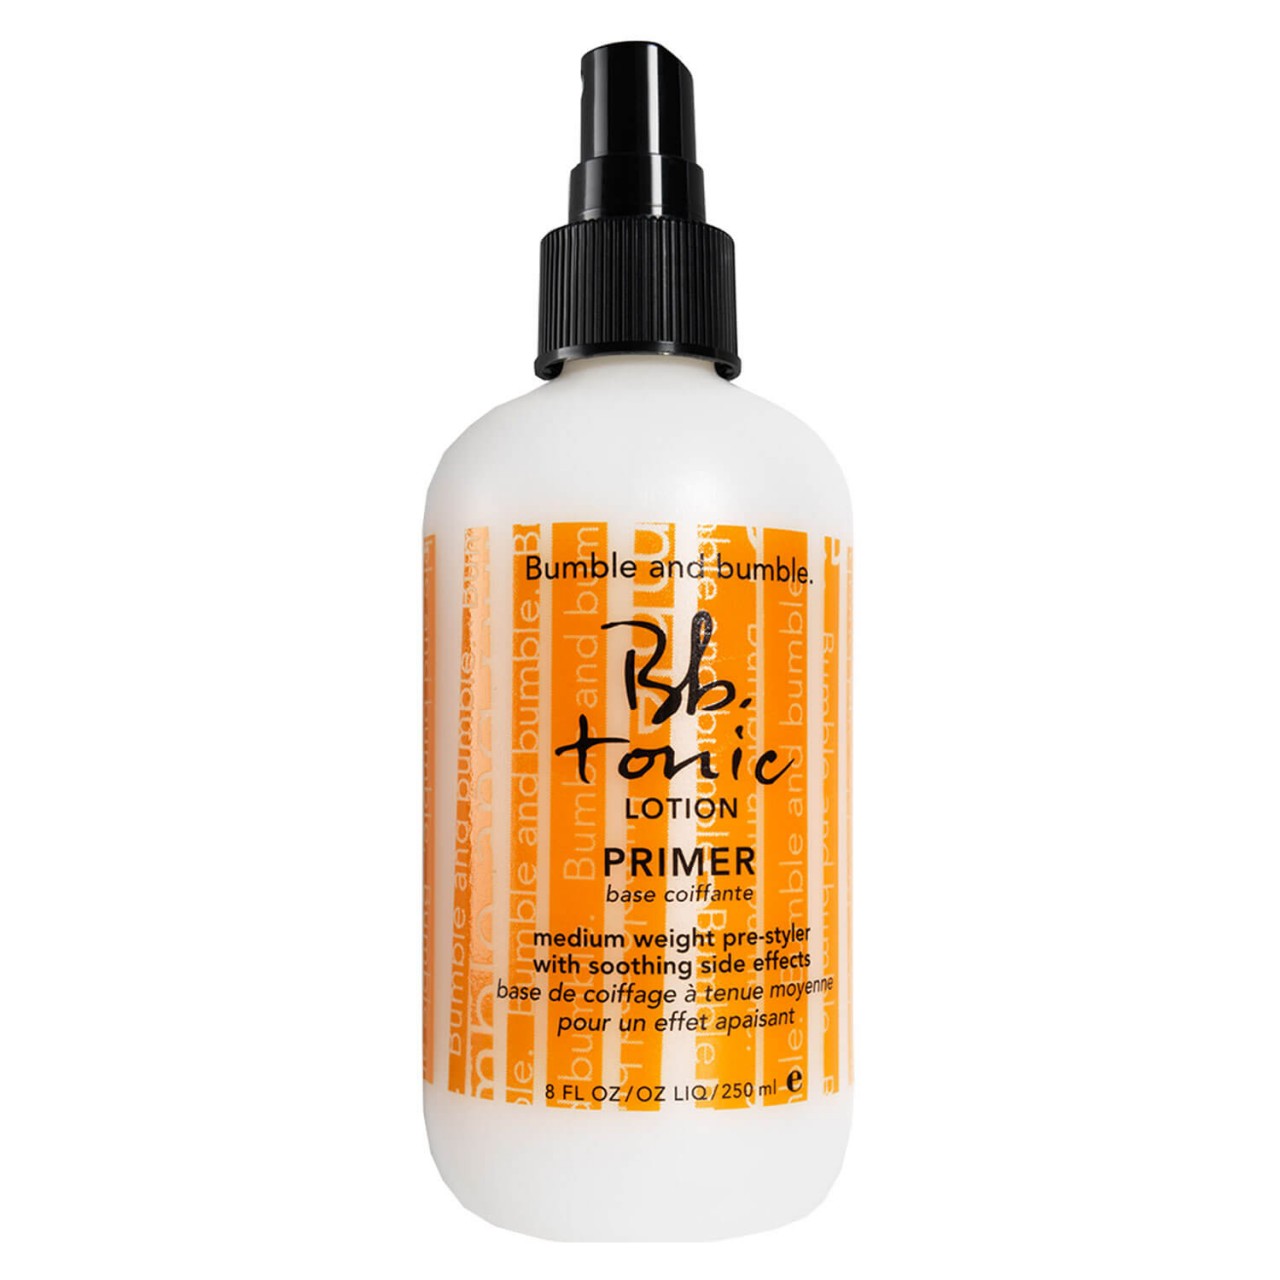 Bb. Styling - Tonic Lotion von Bumble and bumble.